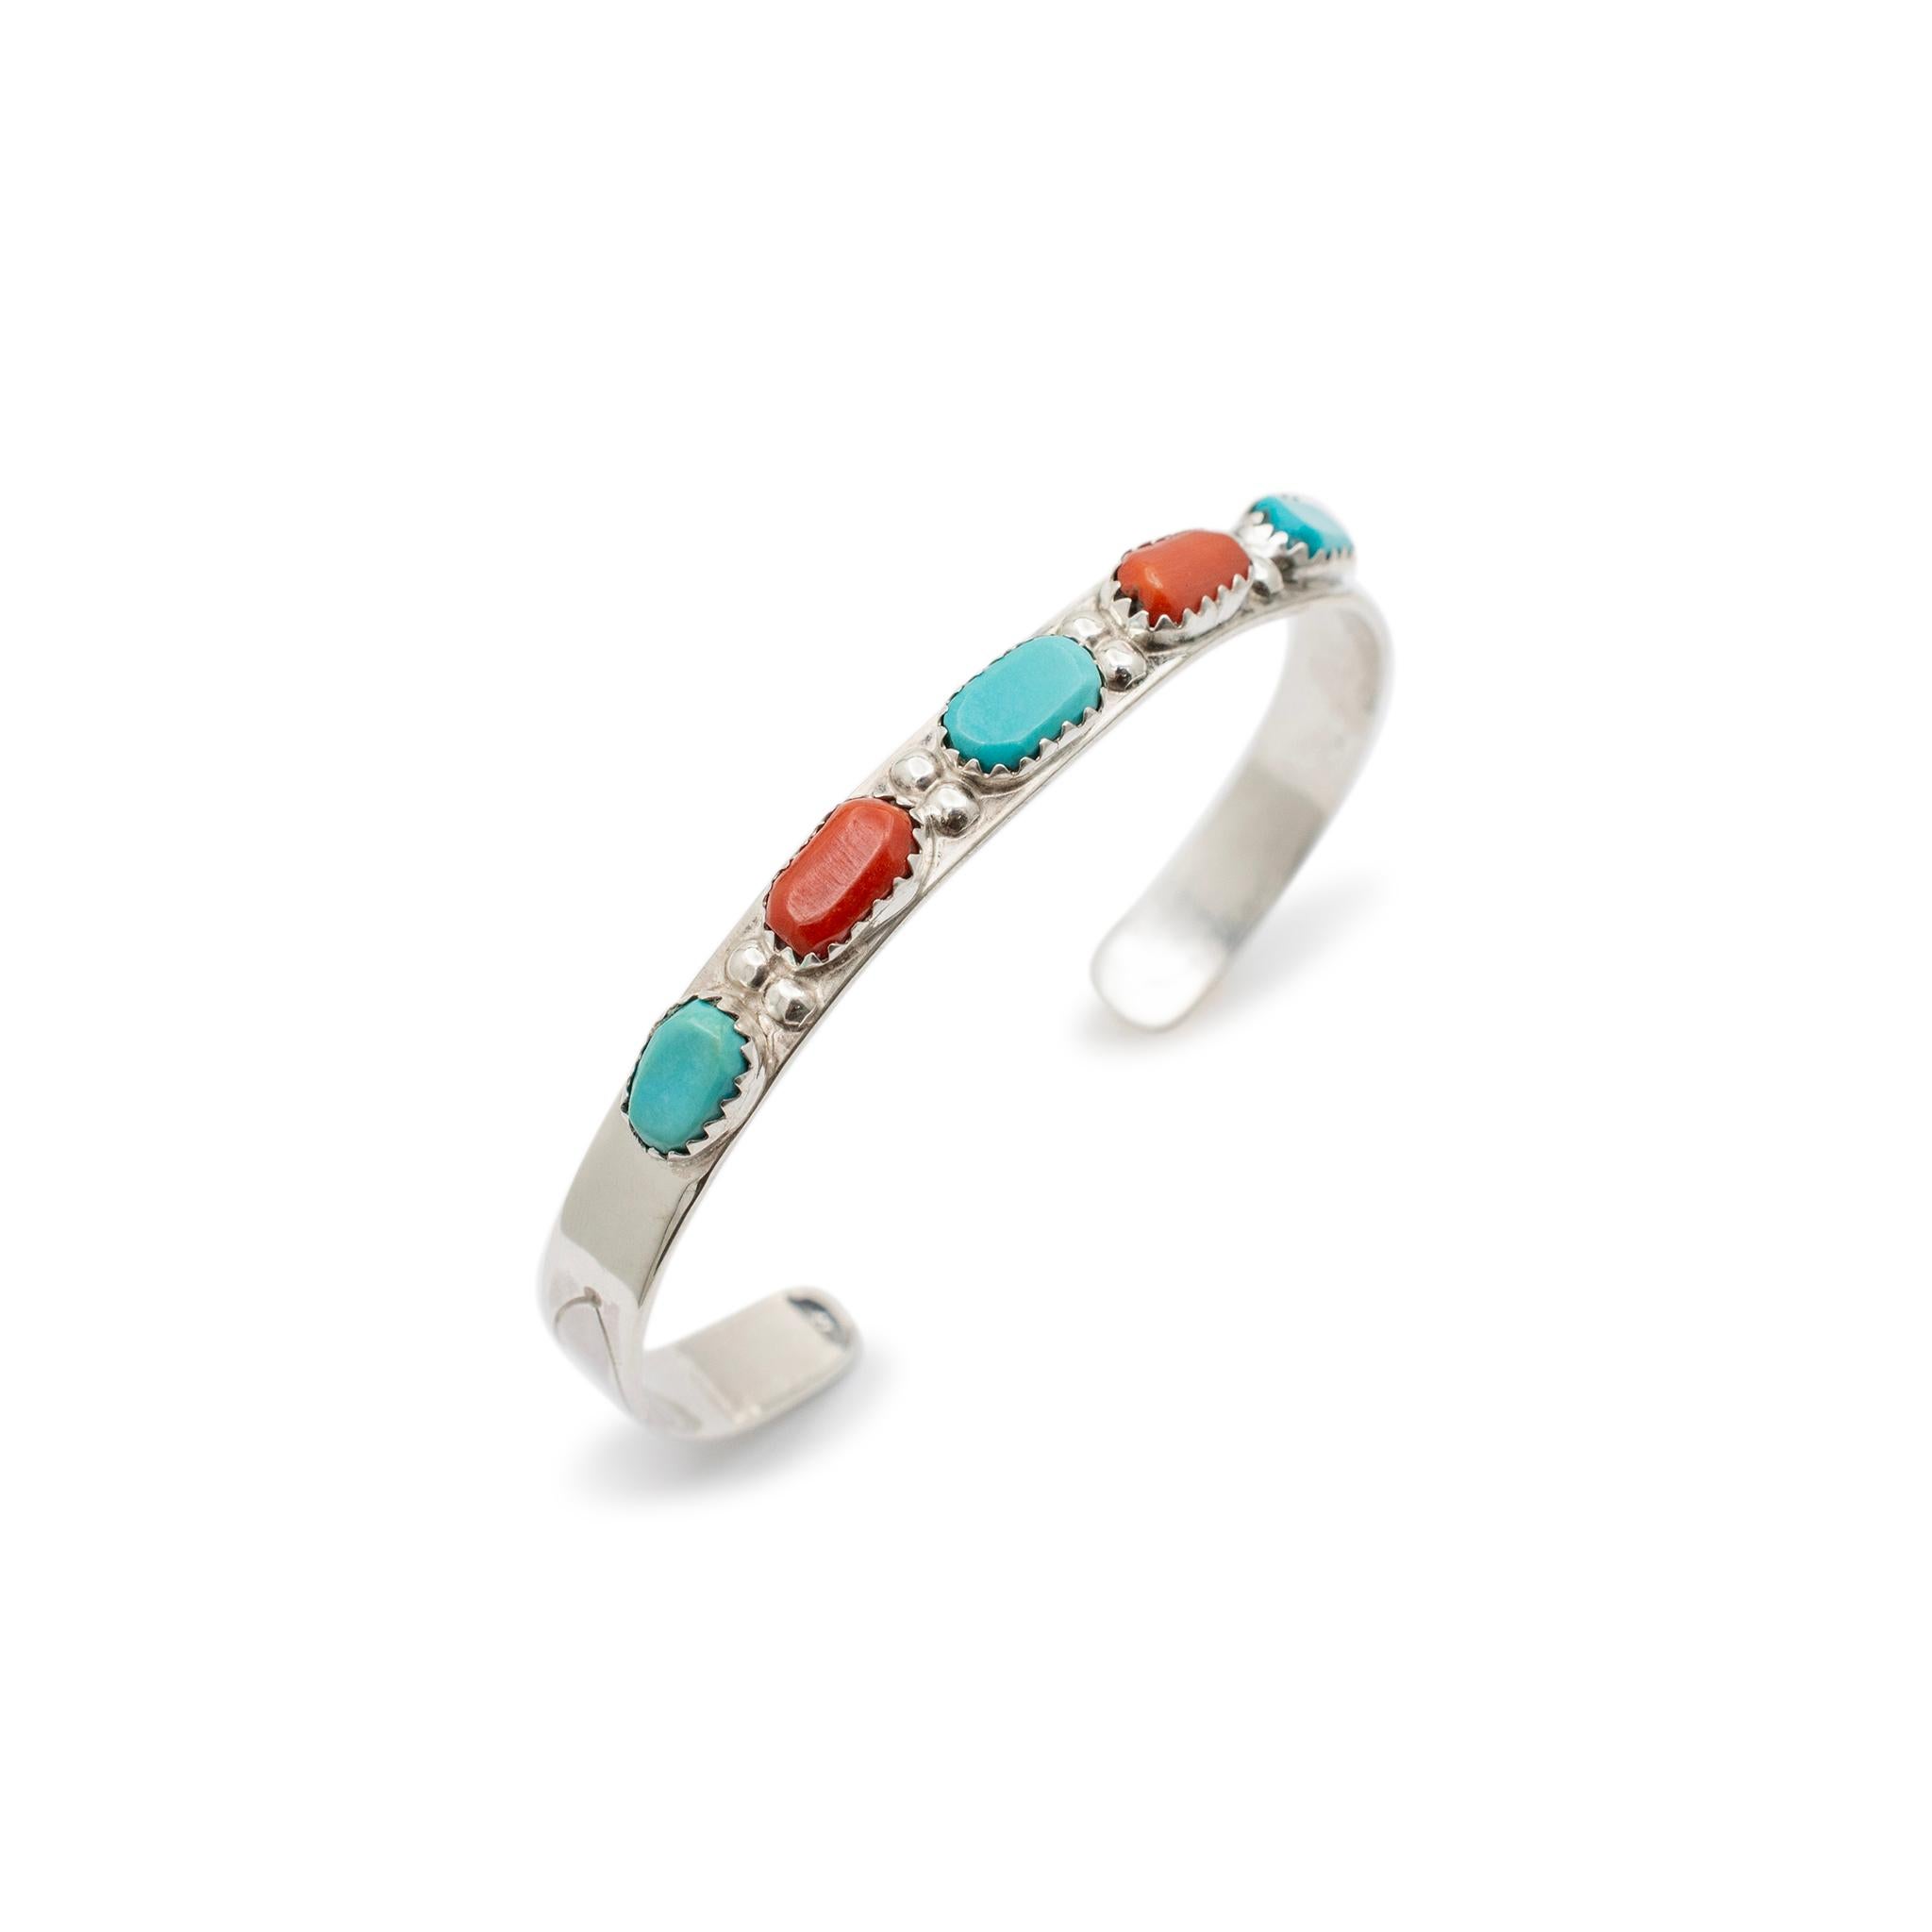 Gender: Ladies

Metal Type: 925 Sterling Silver

Width: 6.50 mm

Weight: 10.80 grams

Ladies matte finished silver synthetic turquoise bracelet. Stamped 